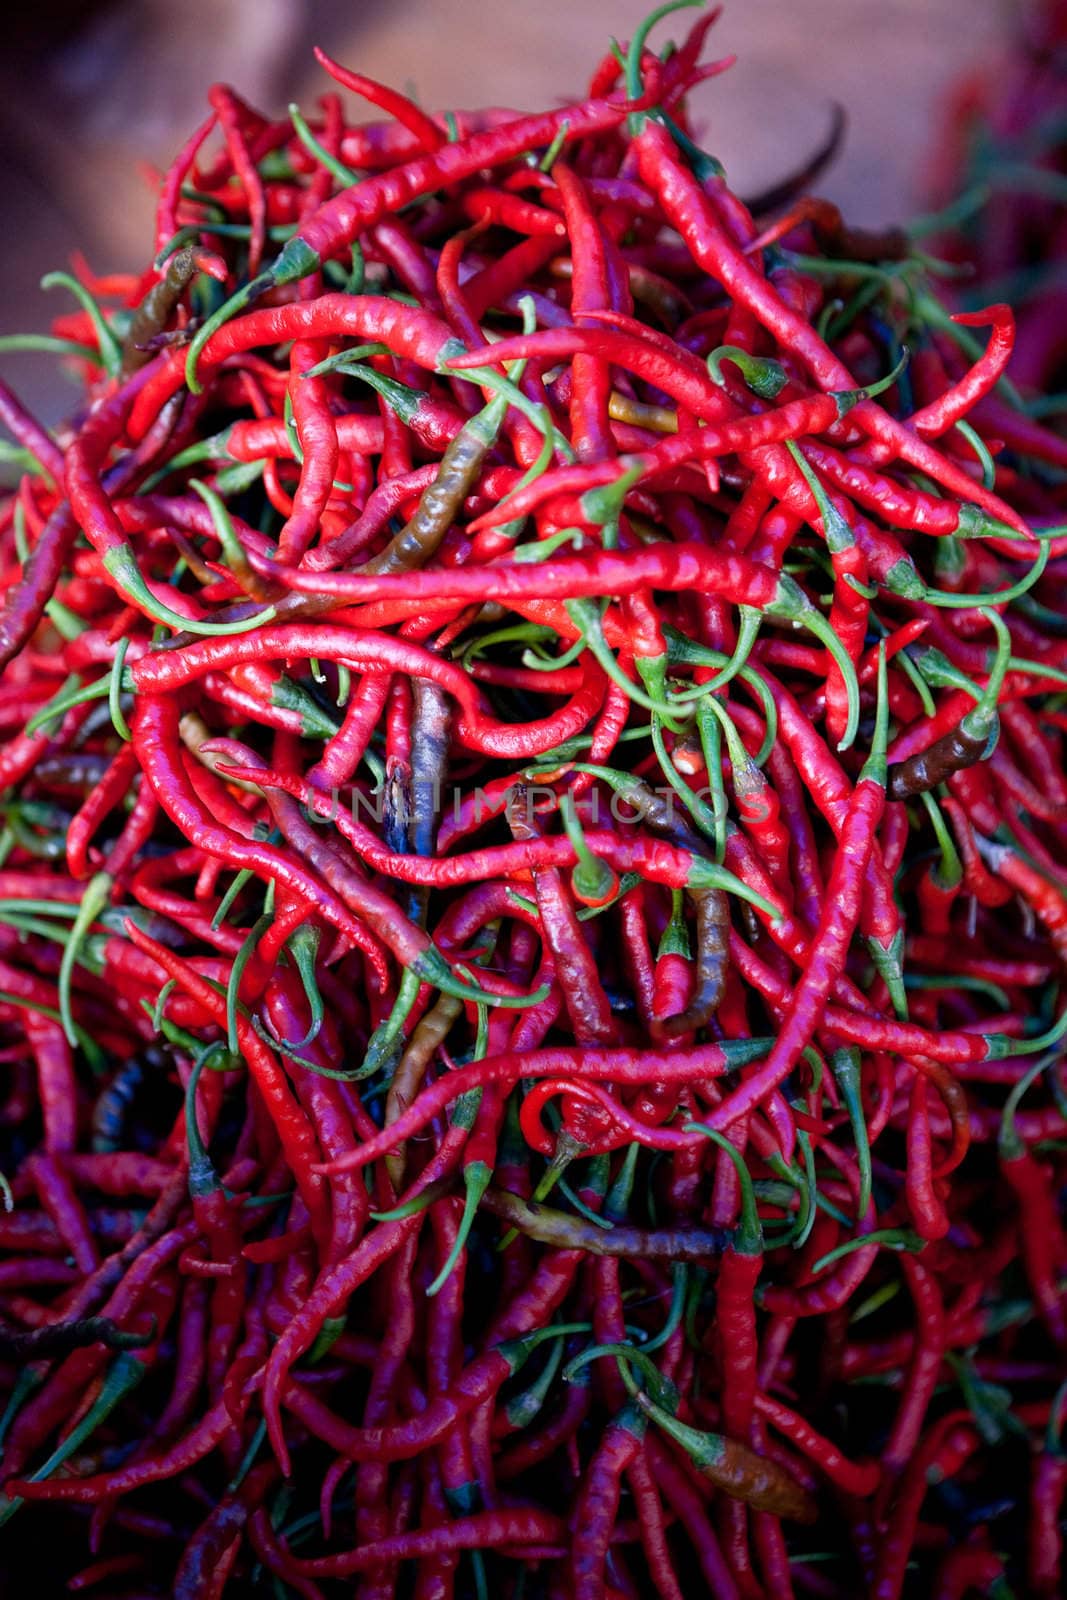 A stack of red chili peppers